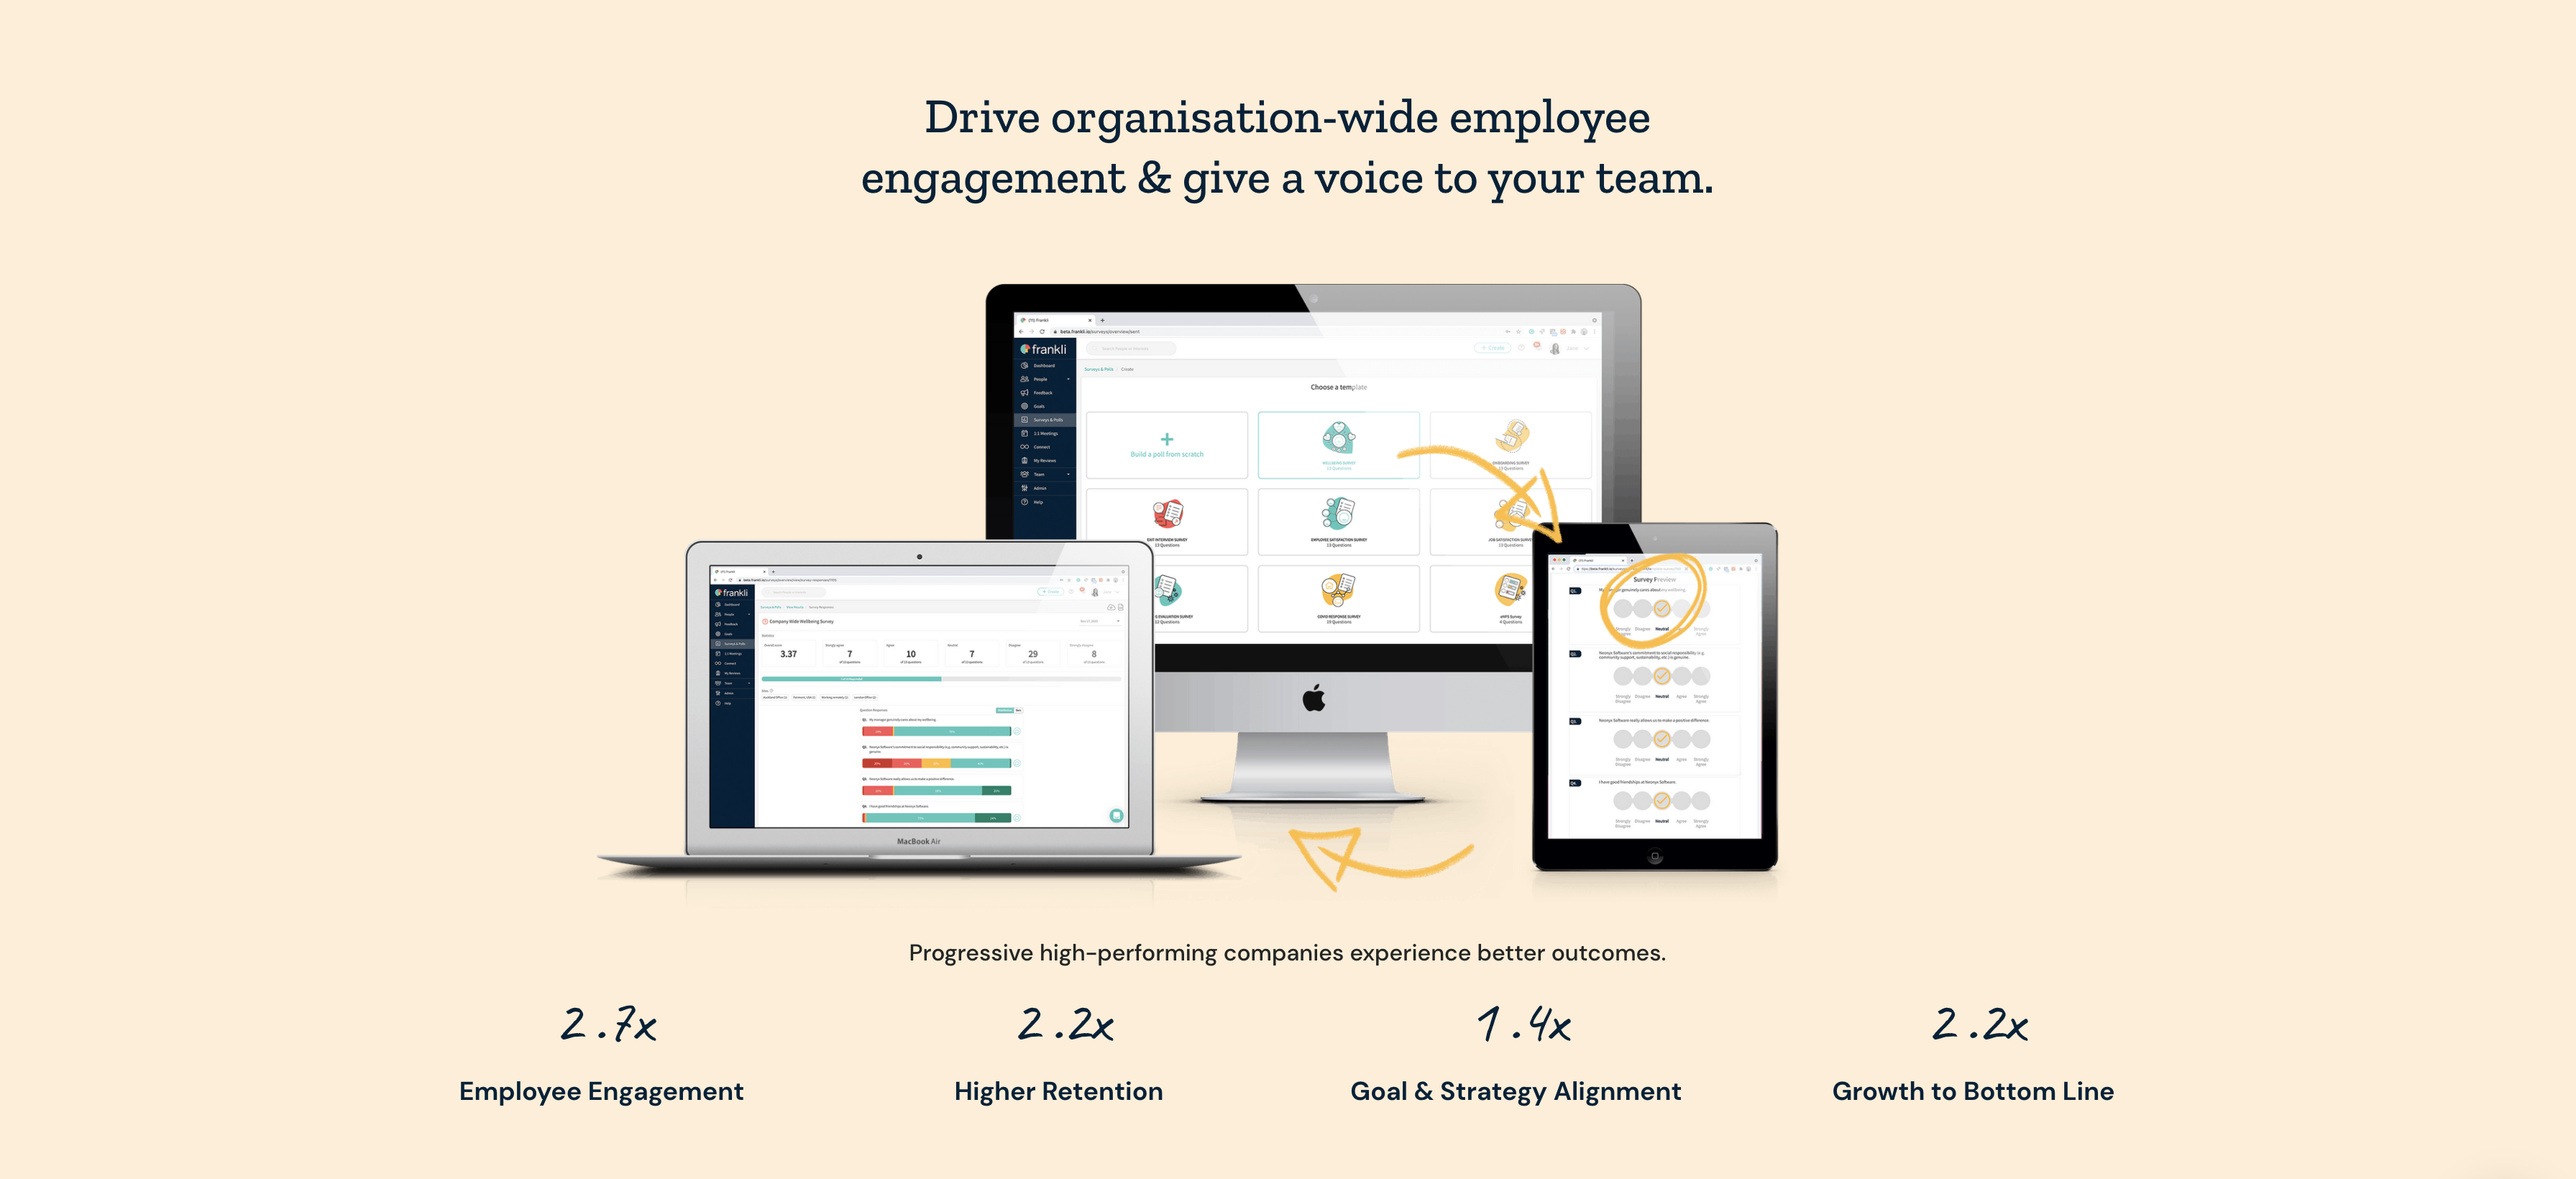 Drive organisation-wide employee engagement & give a voice to your team.